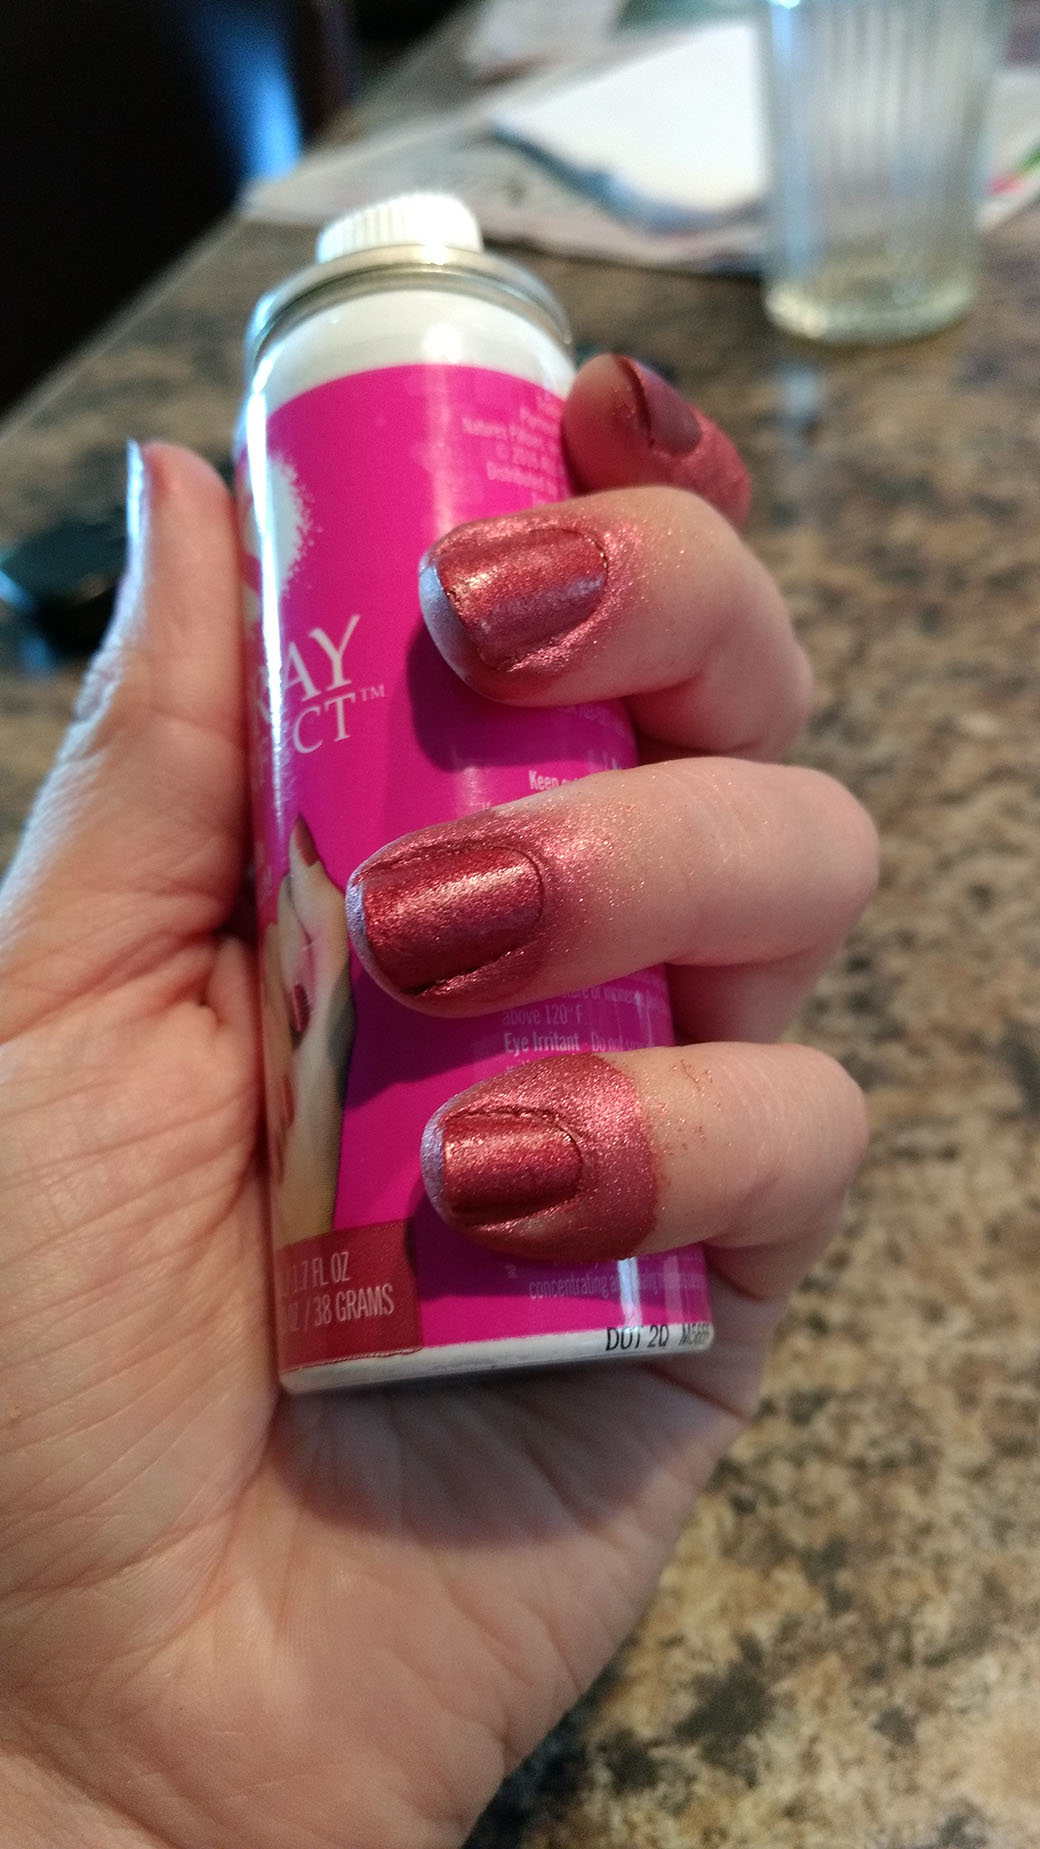 Spray Perfect: A Highly Imperfect Nail Polish